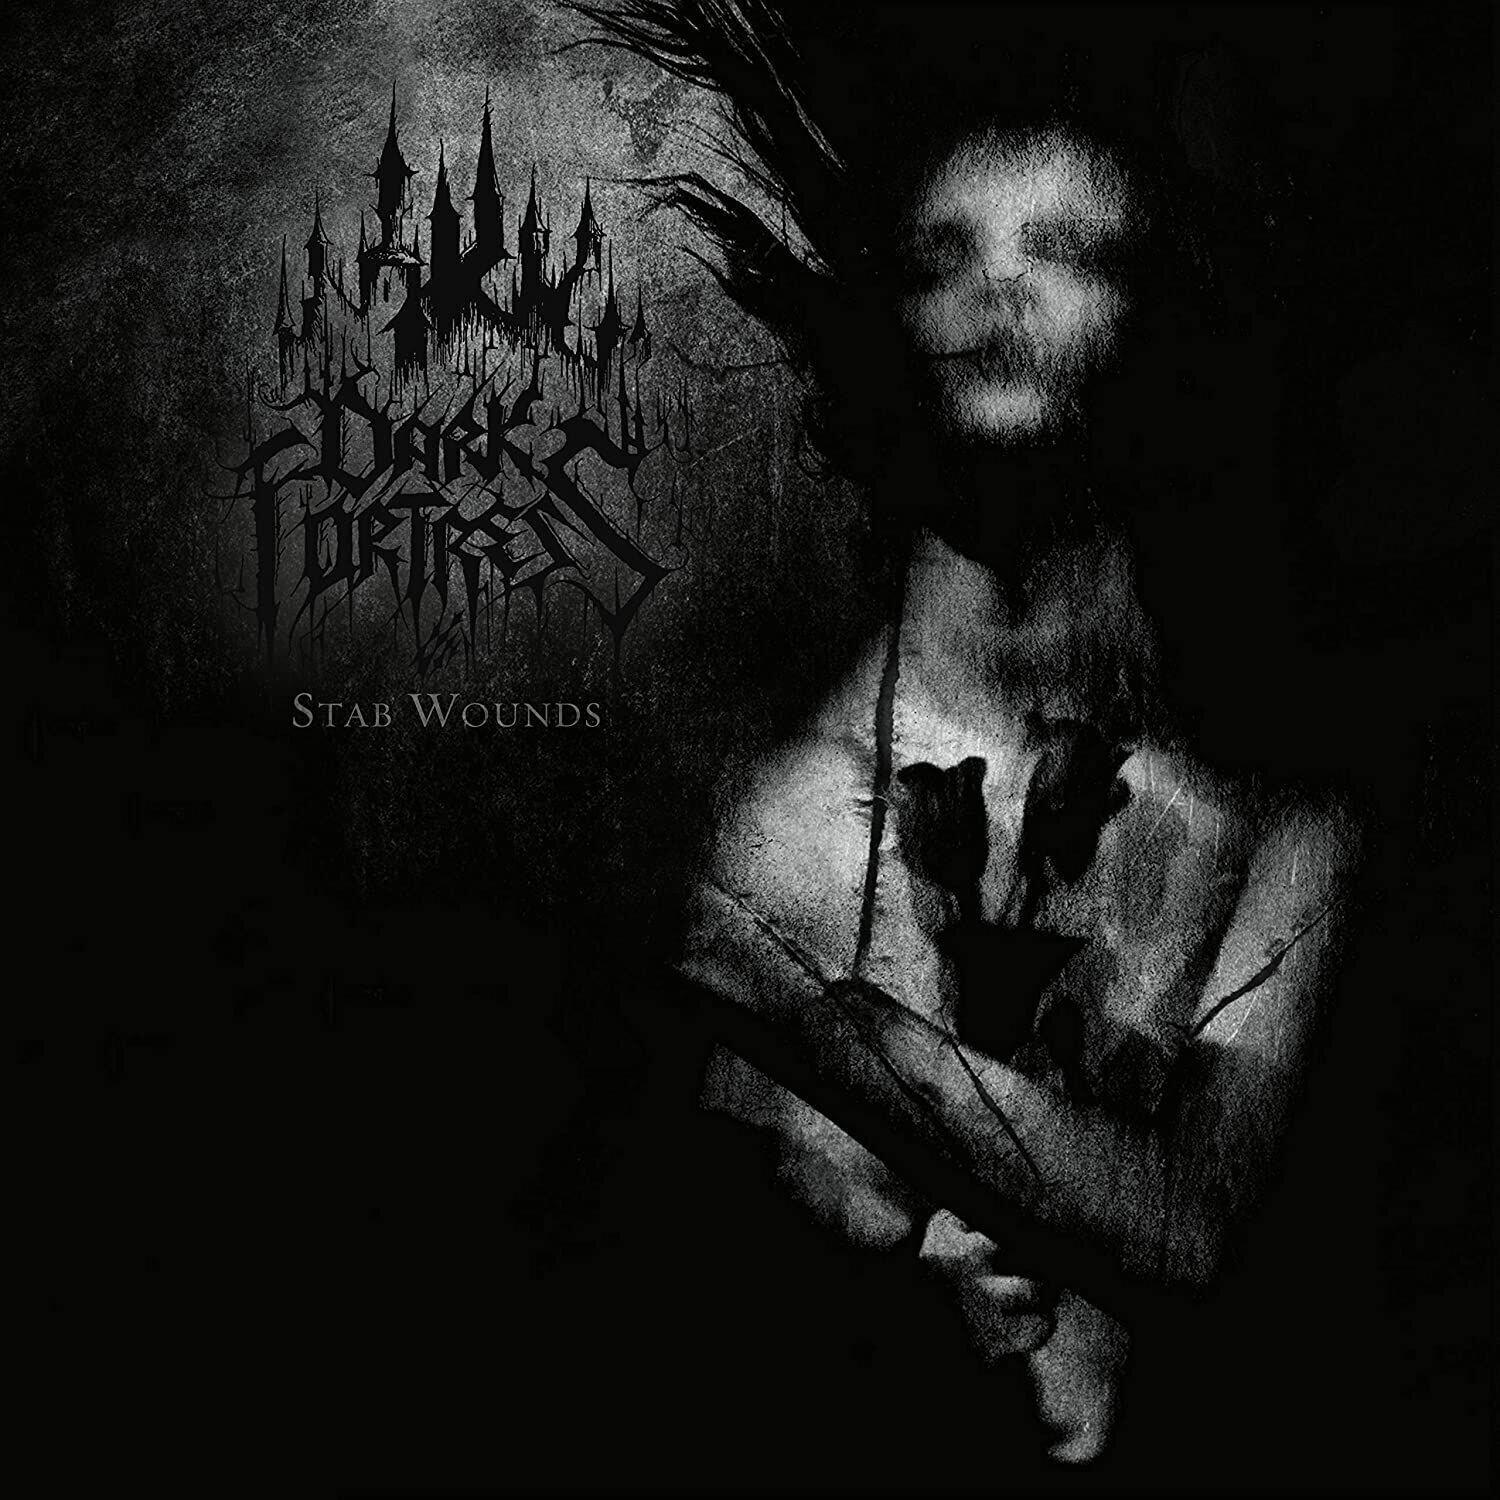 Vinyl Record Dark Fortress - Stab Wounds (2 LP)